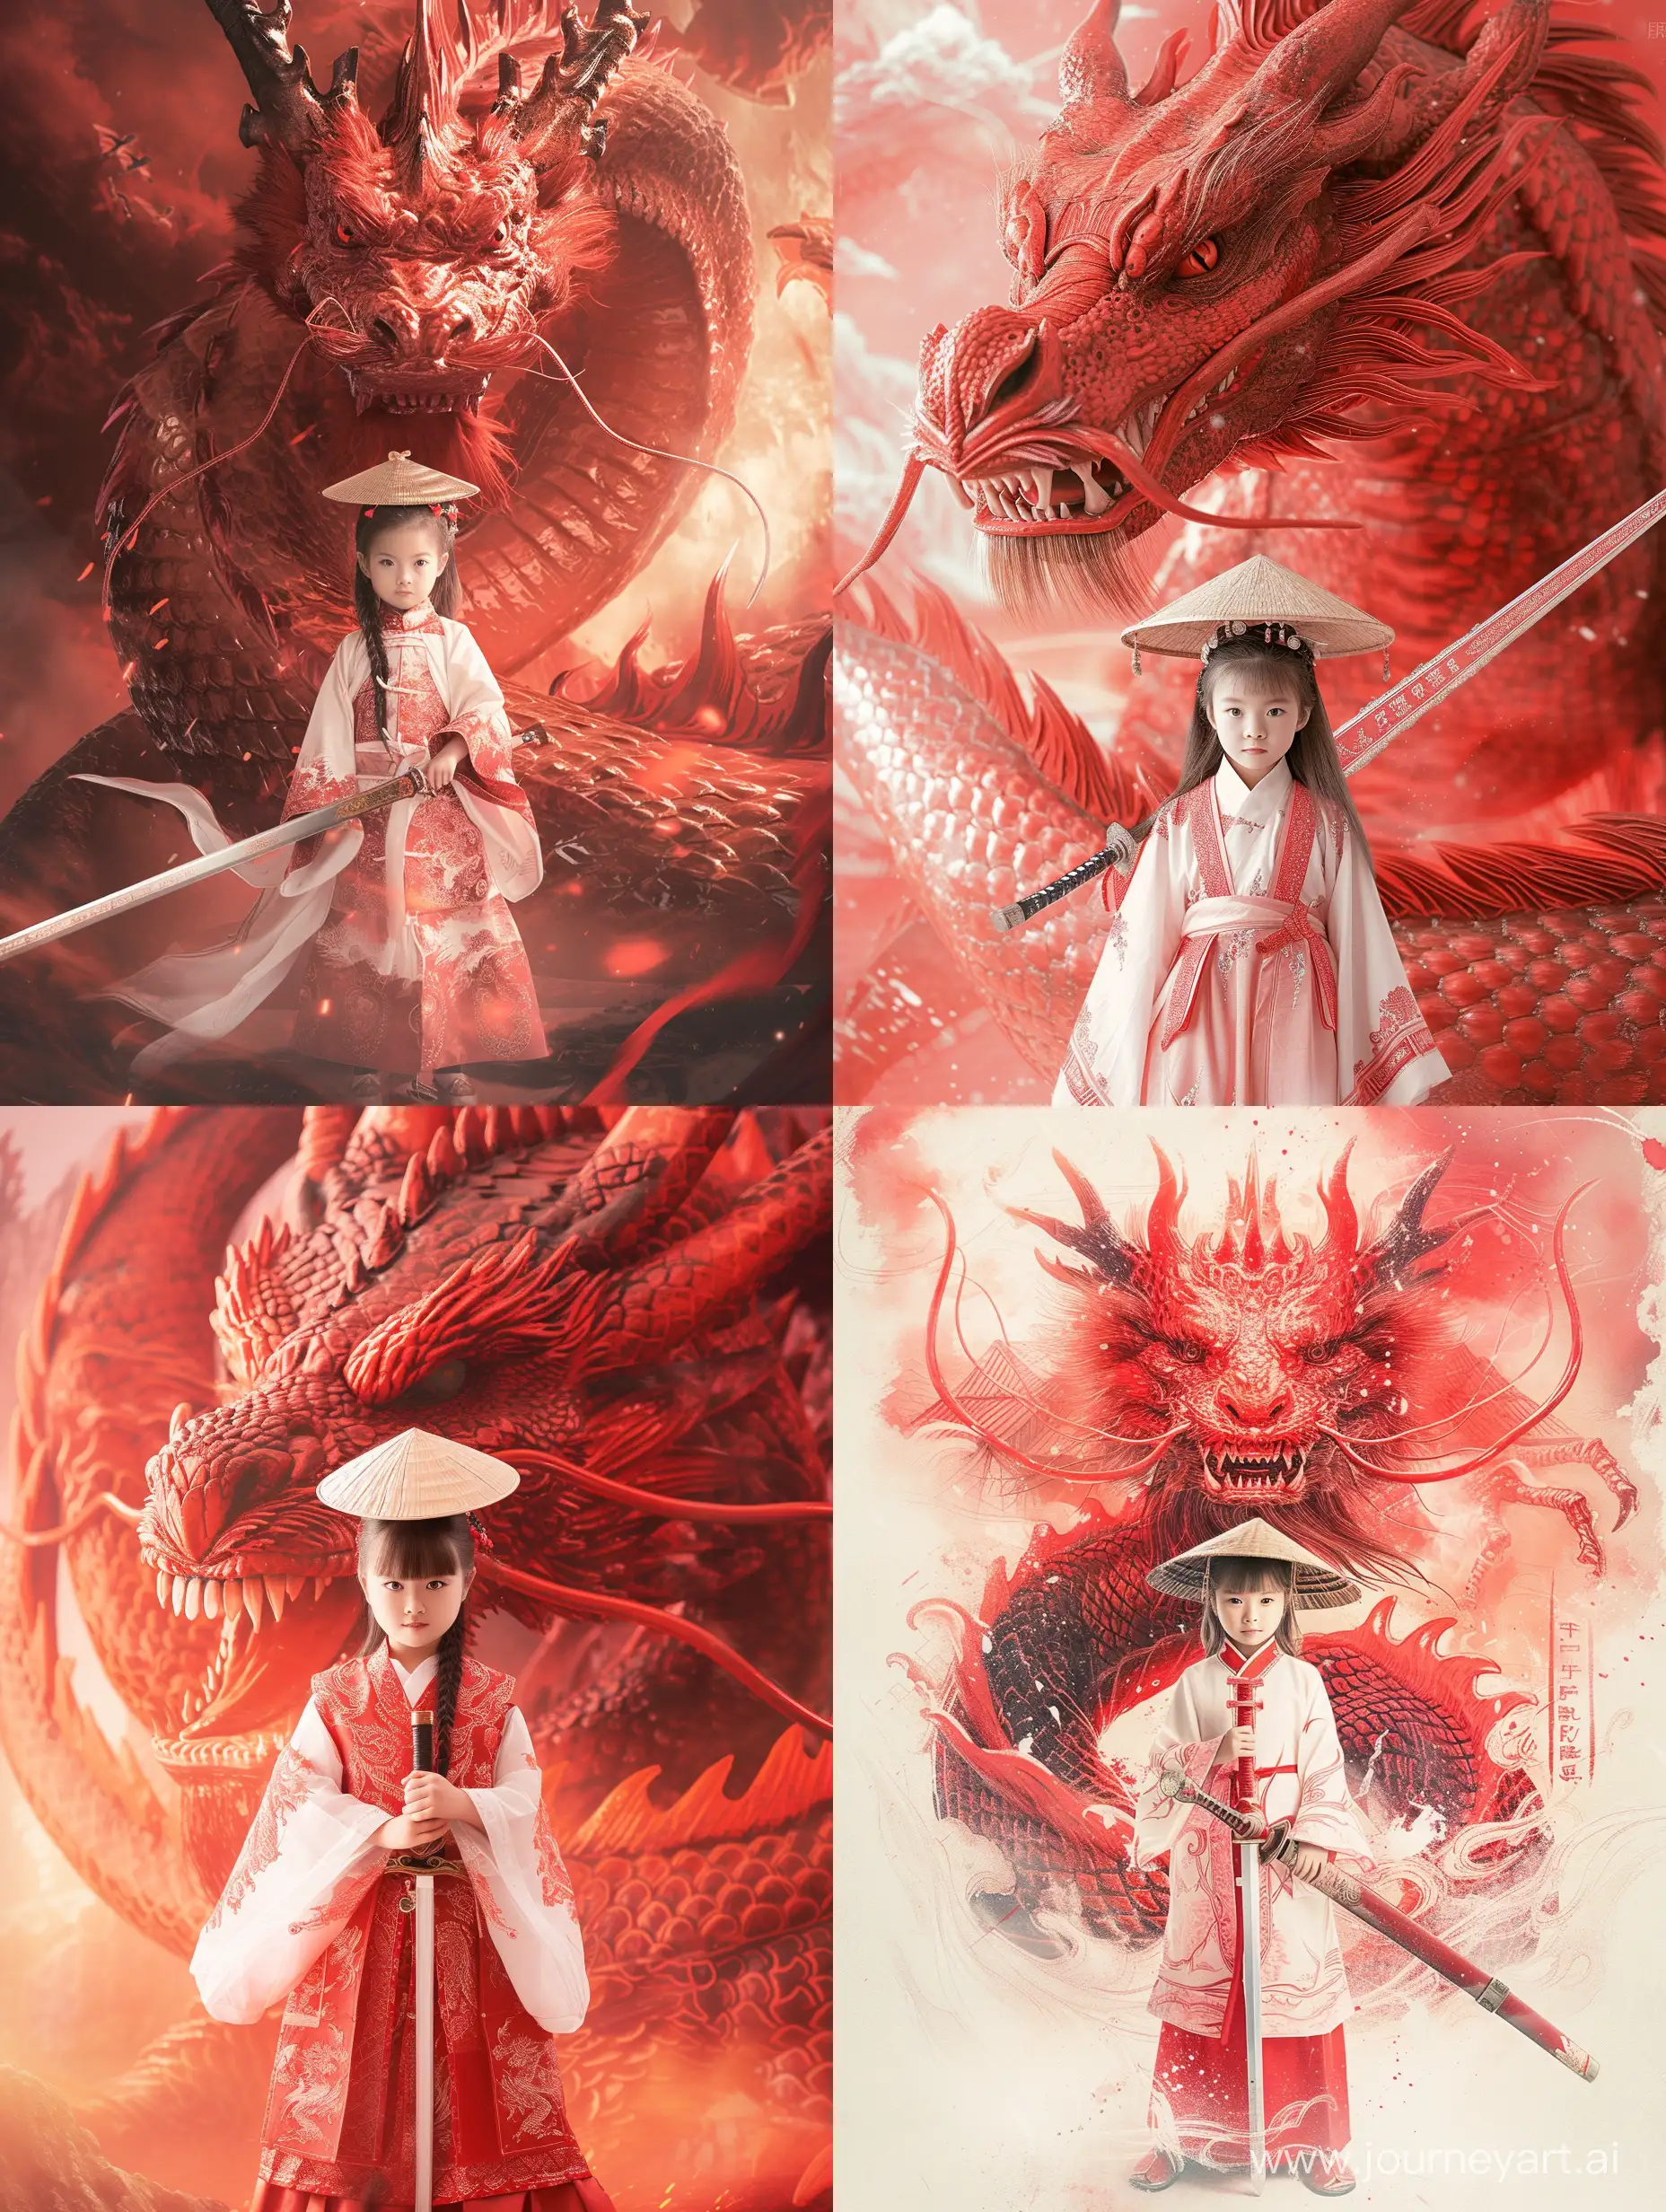 Young-Girl-in-Traditional-Chinese-Attire-Confronting-Dreamy-Red-Dragon-with-Sword